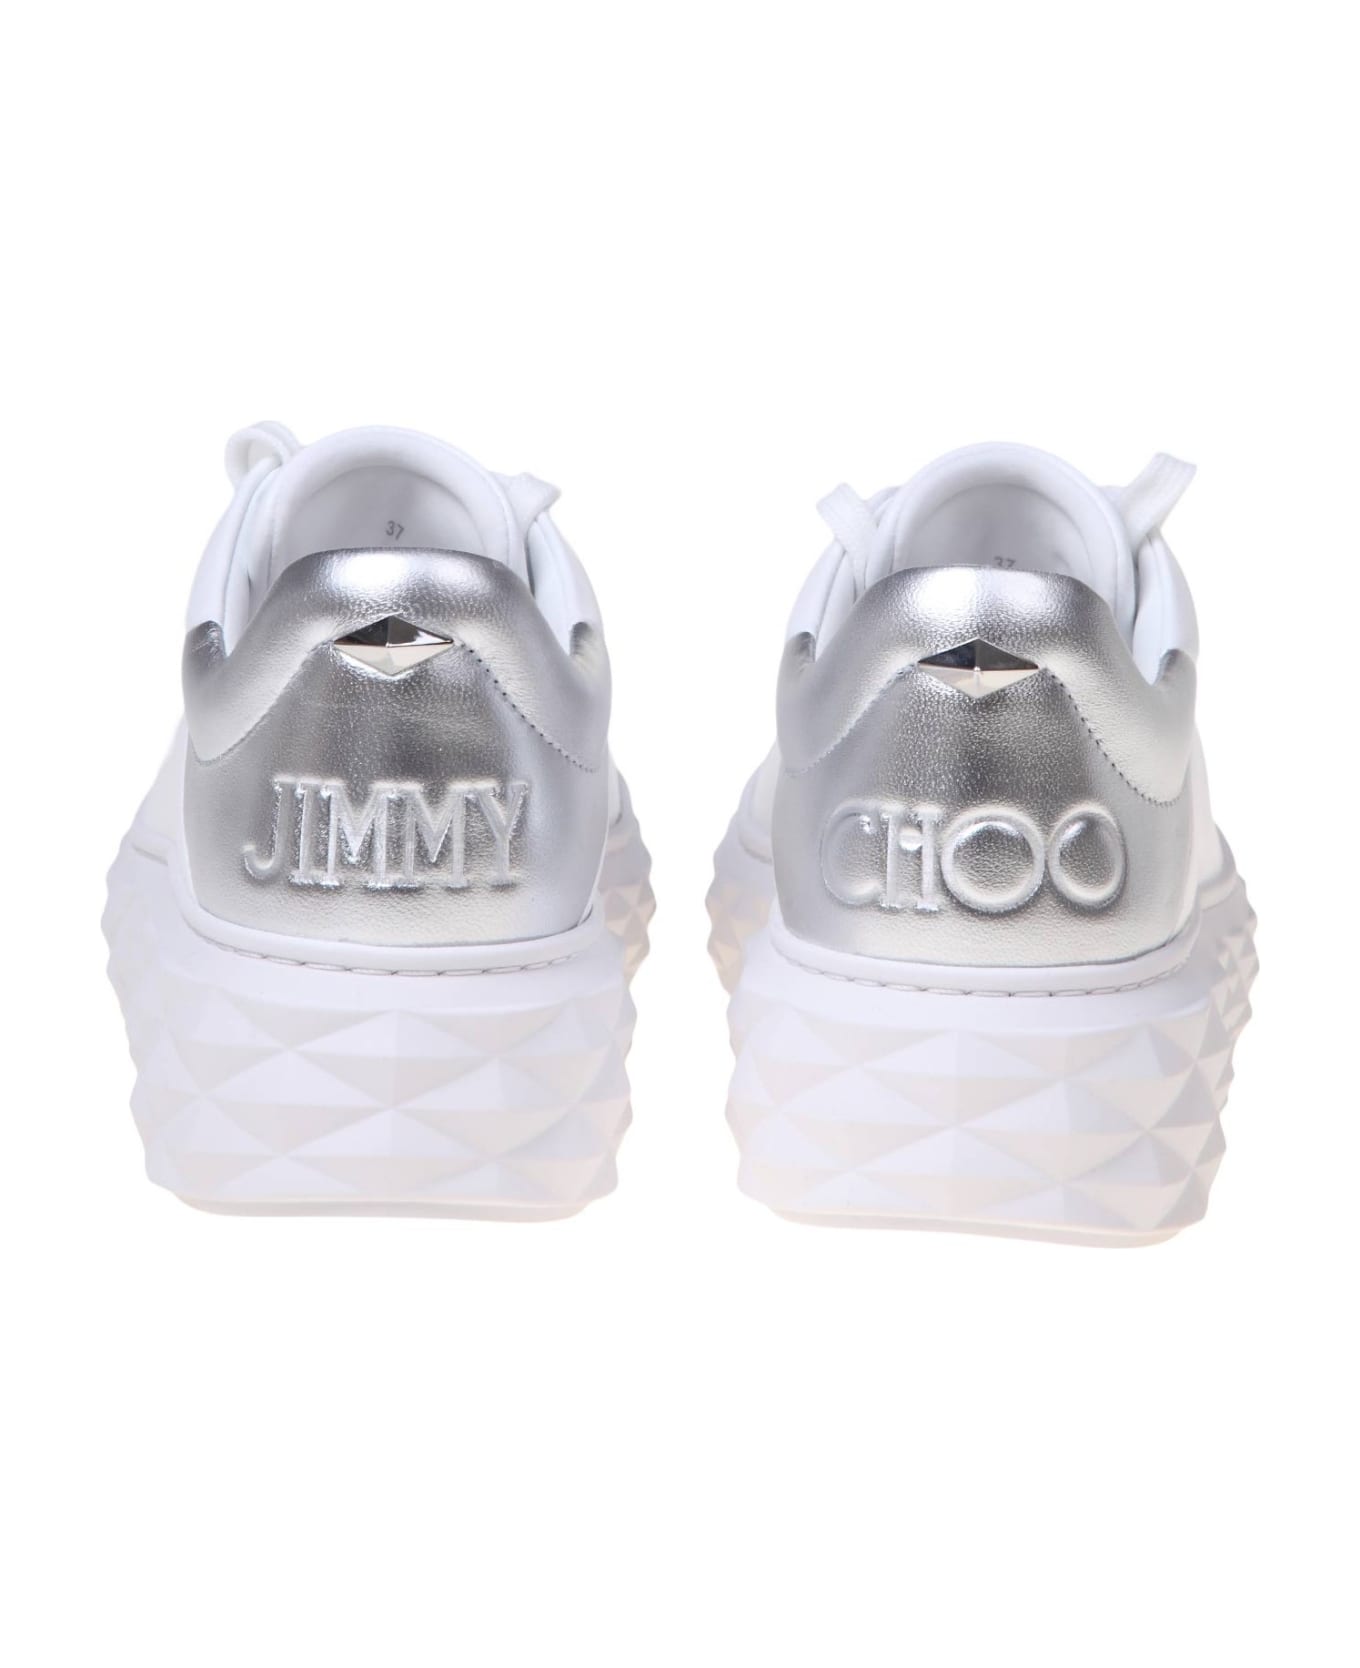 Jimmy Choo Diamond Maxi Sneakers In White And Silver Leather - White/Silver